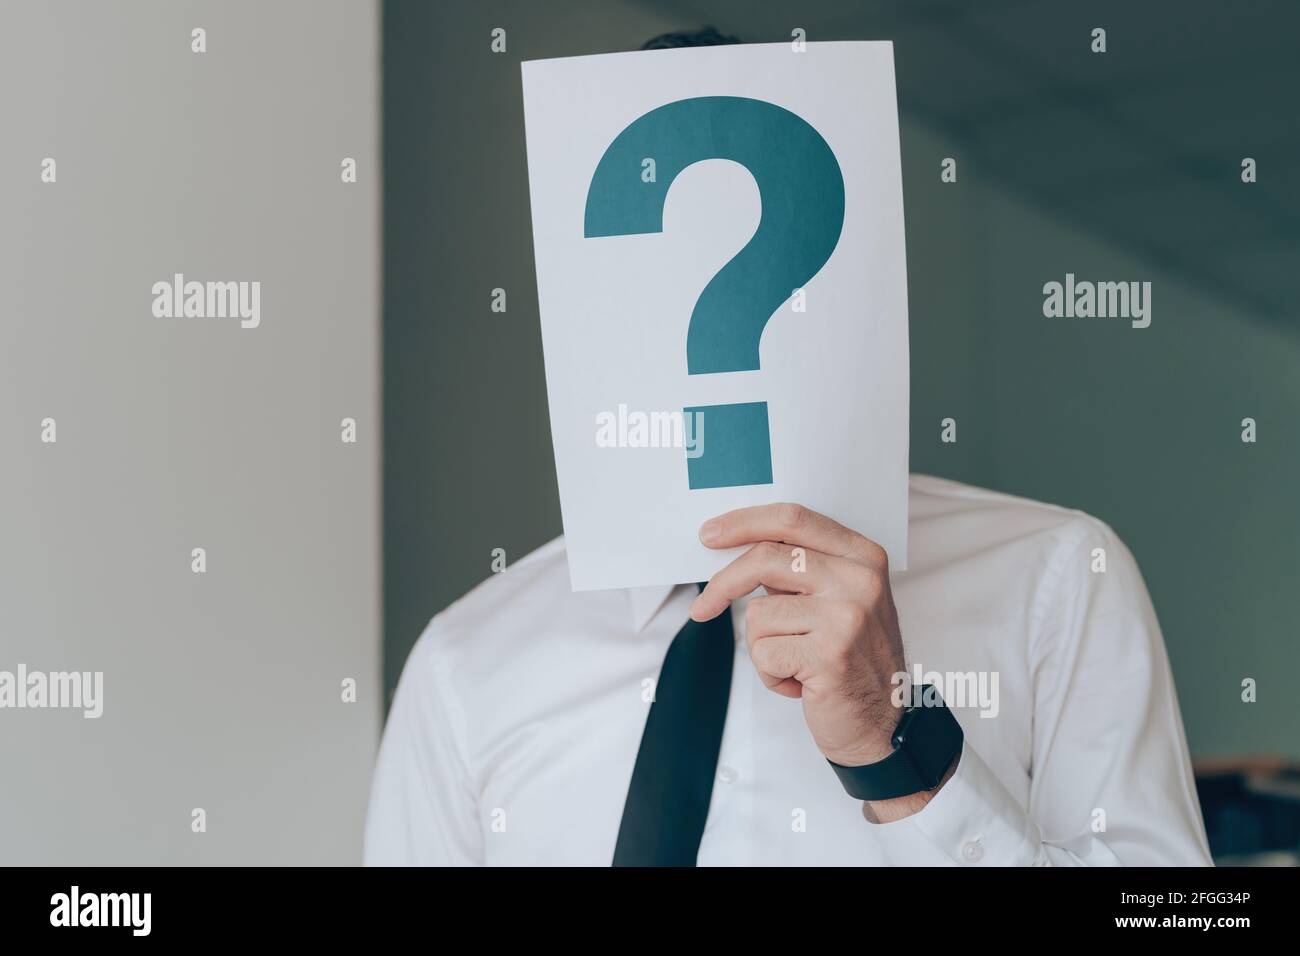 Businessman holding paper with printed question mark over his face, selective focus Stock Photo